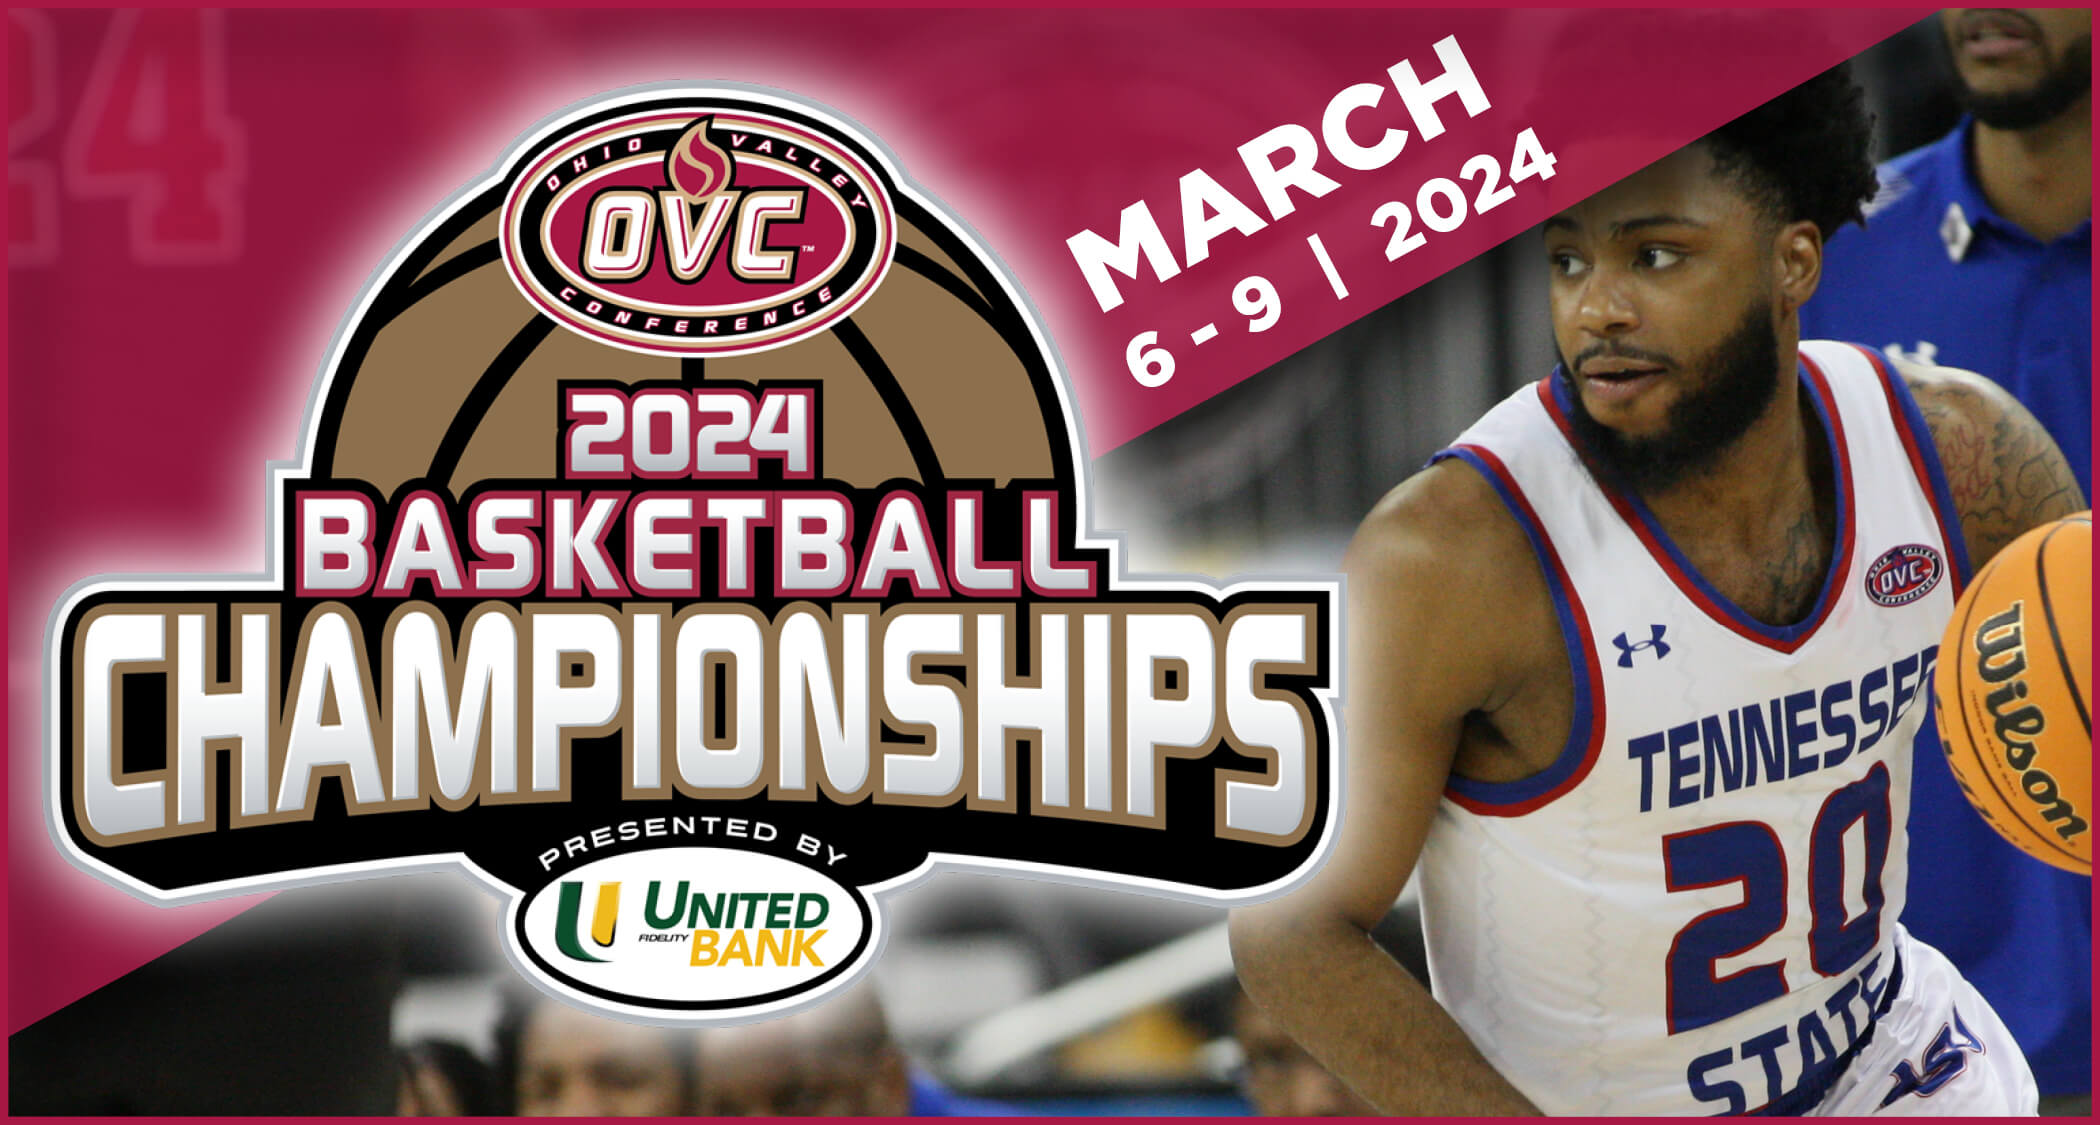 City Officials, OVC leadership Kick Off “OVC Championship Week” in Evansville